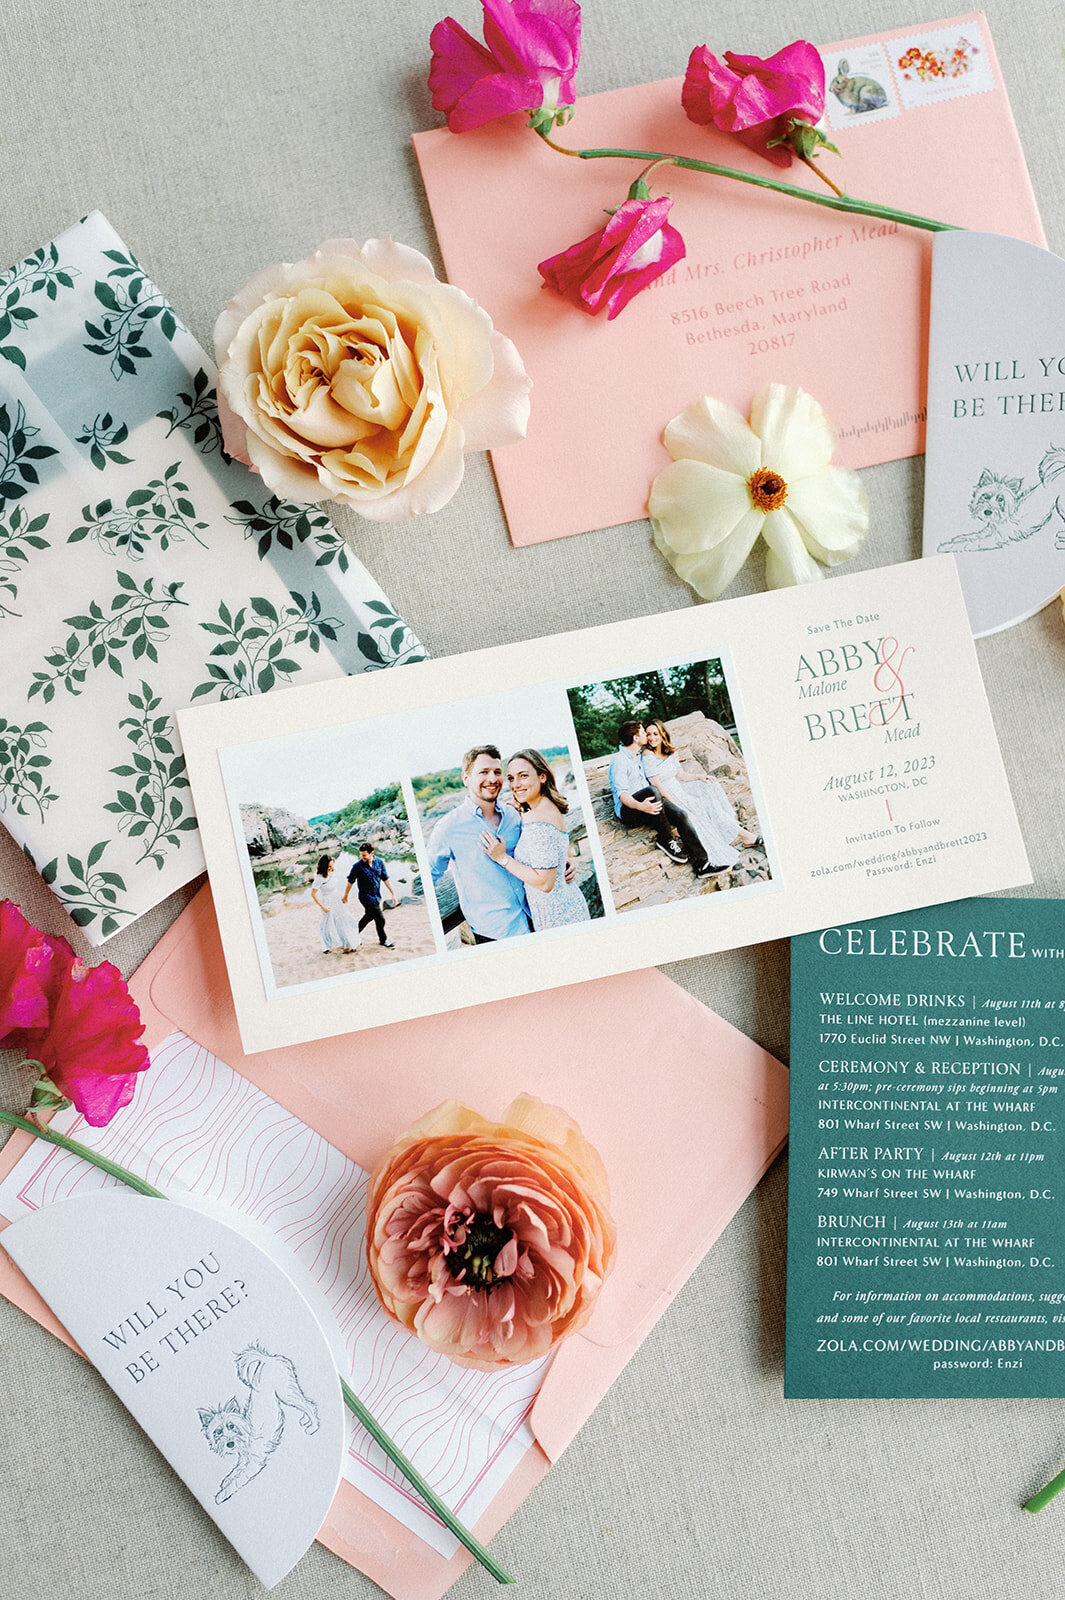 invitation design with florals and photos of the couple in washington dc